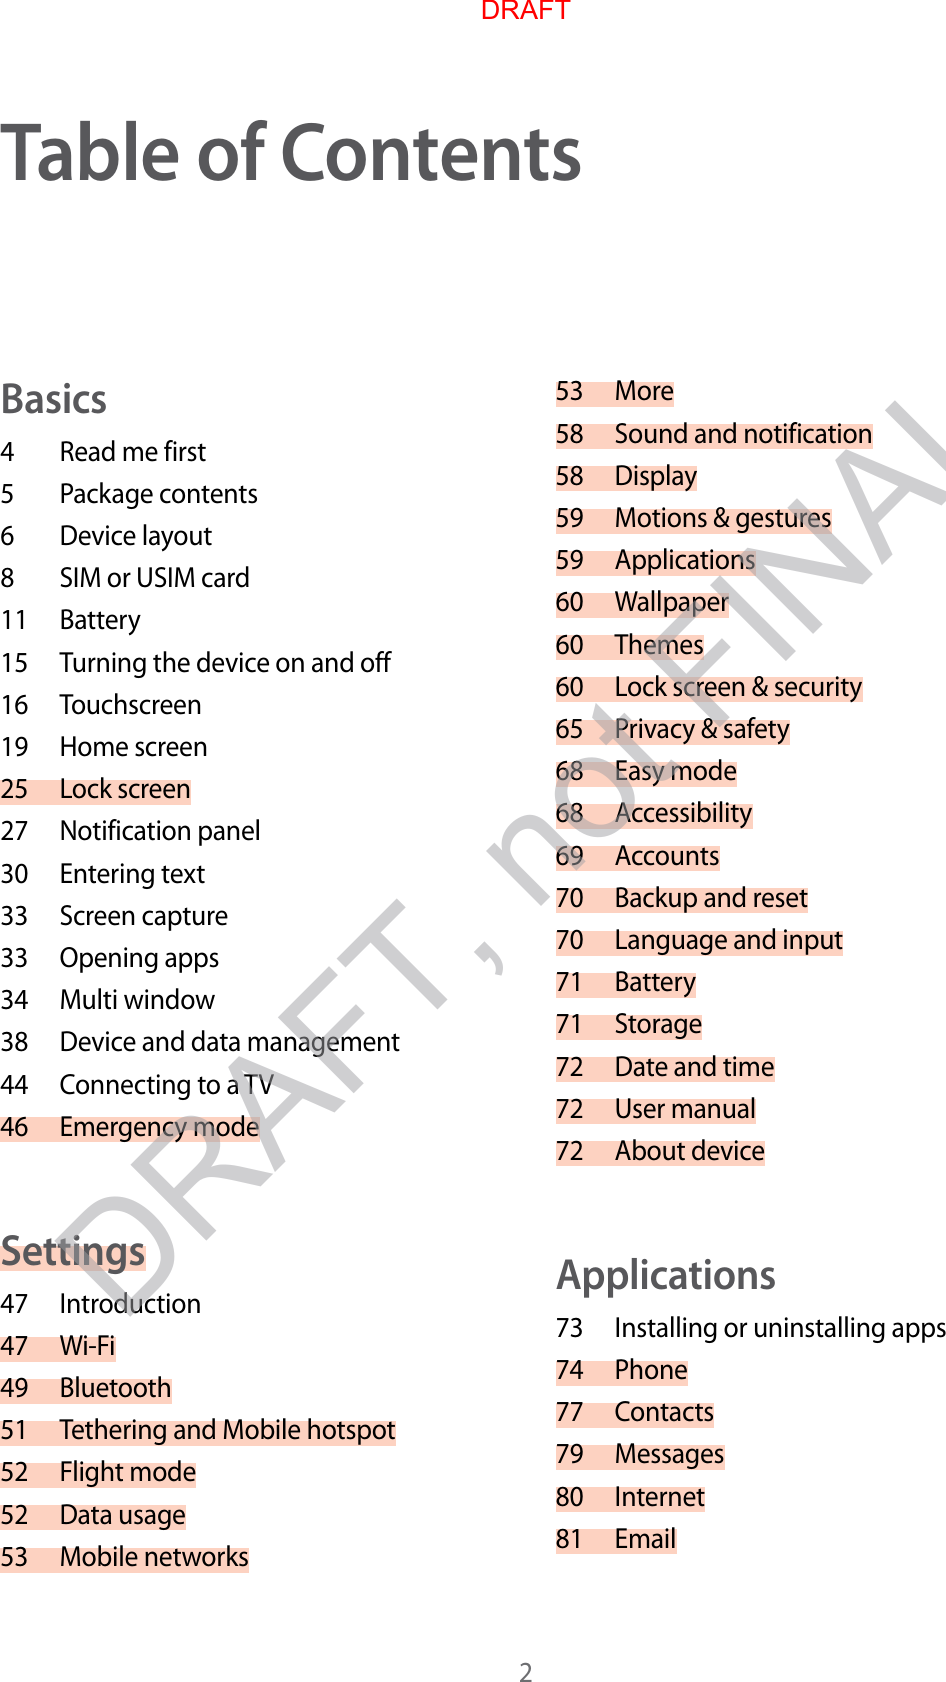 2Table of C on t entsBasics4  Read me first5  P ackage conten ts6  Device lay out8  SIM or USIM card11 Battery15 Turning the device on and off16 Touchscreen19 Home screen25 Lock scr een27 Notification panel30 Entering text33 Screen capture33 Opening apps34 Multi window38 Device and data management44 Connecting to a TV46 Emergency modeSettings47 Introduction47 Wi-Fi49 Bluetooth51 Tethering and Mobile hotspot52 Fligh t mode52 Data usage53 Mobile networks53 More58 Sound and notification58 Display59 Motions &amp; gestures59 Applications60 Wallpaper60 Themes60 Lock scr een &amp; security65 Privacy &amp; safety68 Easy mode68 Accessibility69 Accounts70 Backup and reset70 Language and input71 Battery71 Storage72 Date and time72 User manual72 About deviceApplications73 Installing or uninstalling apps74 Phone77 Contacts79 Messages80 Internet81 EmailDRAFTDRAFT, not FINAL